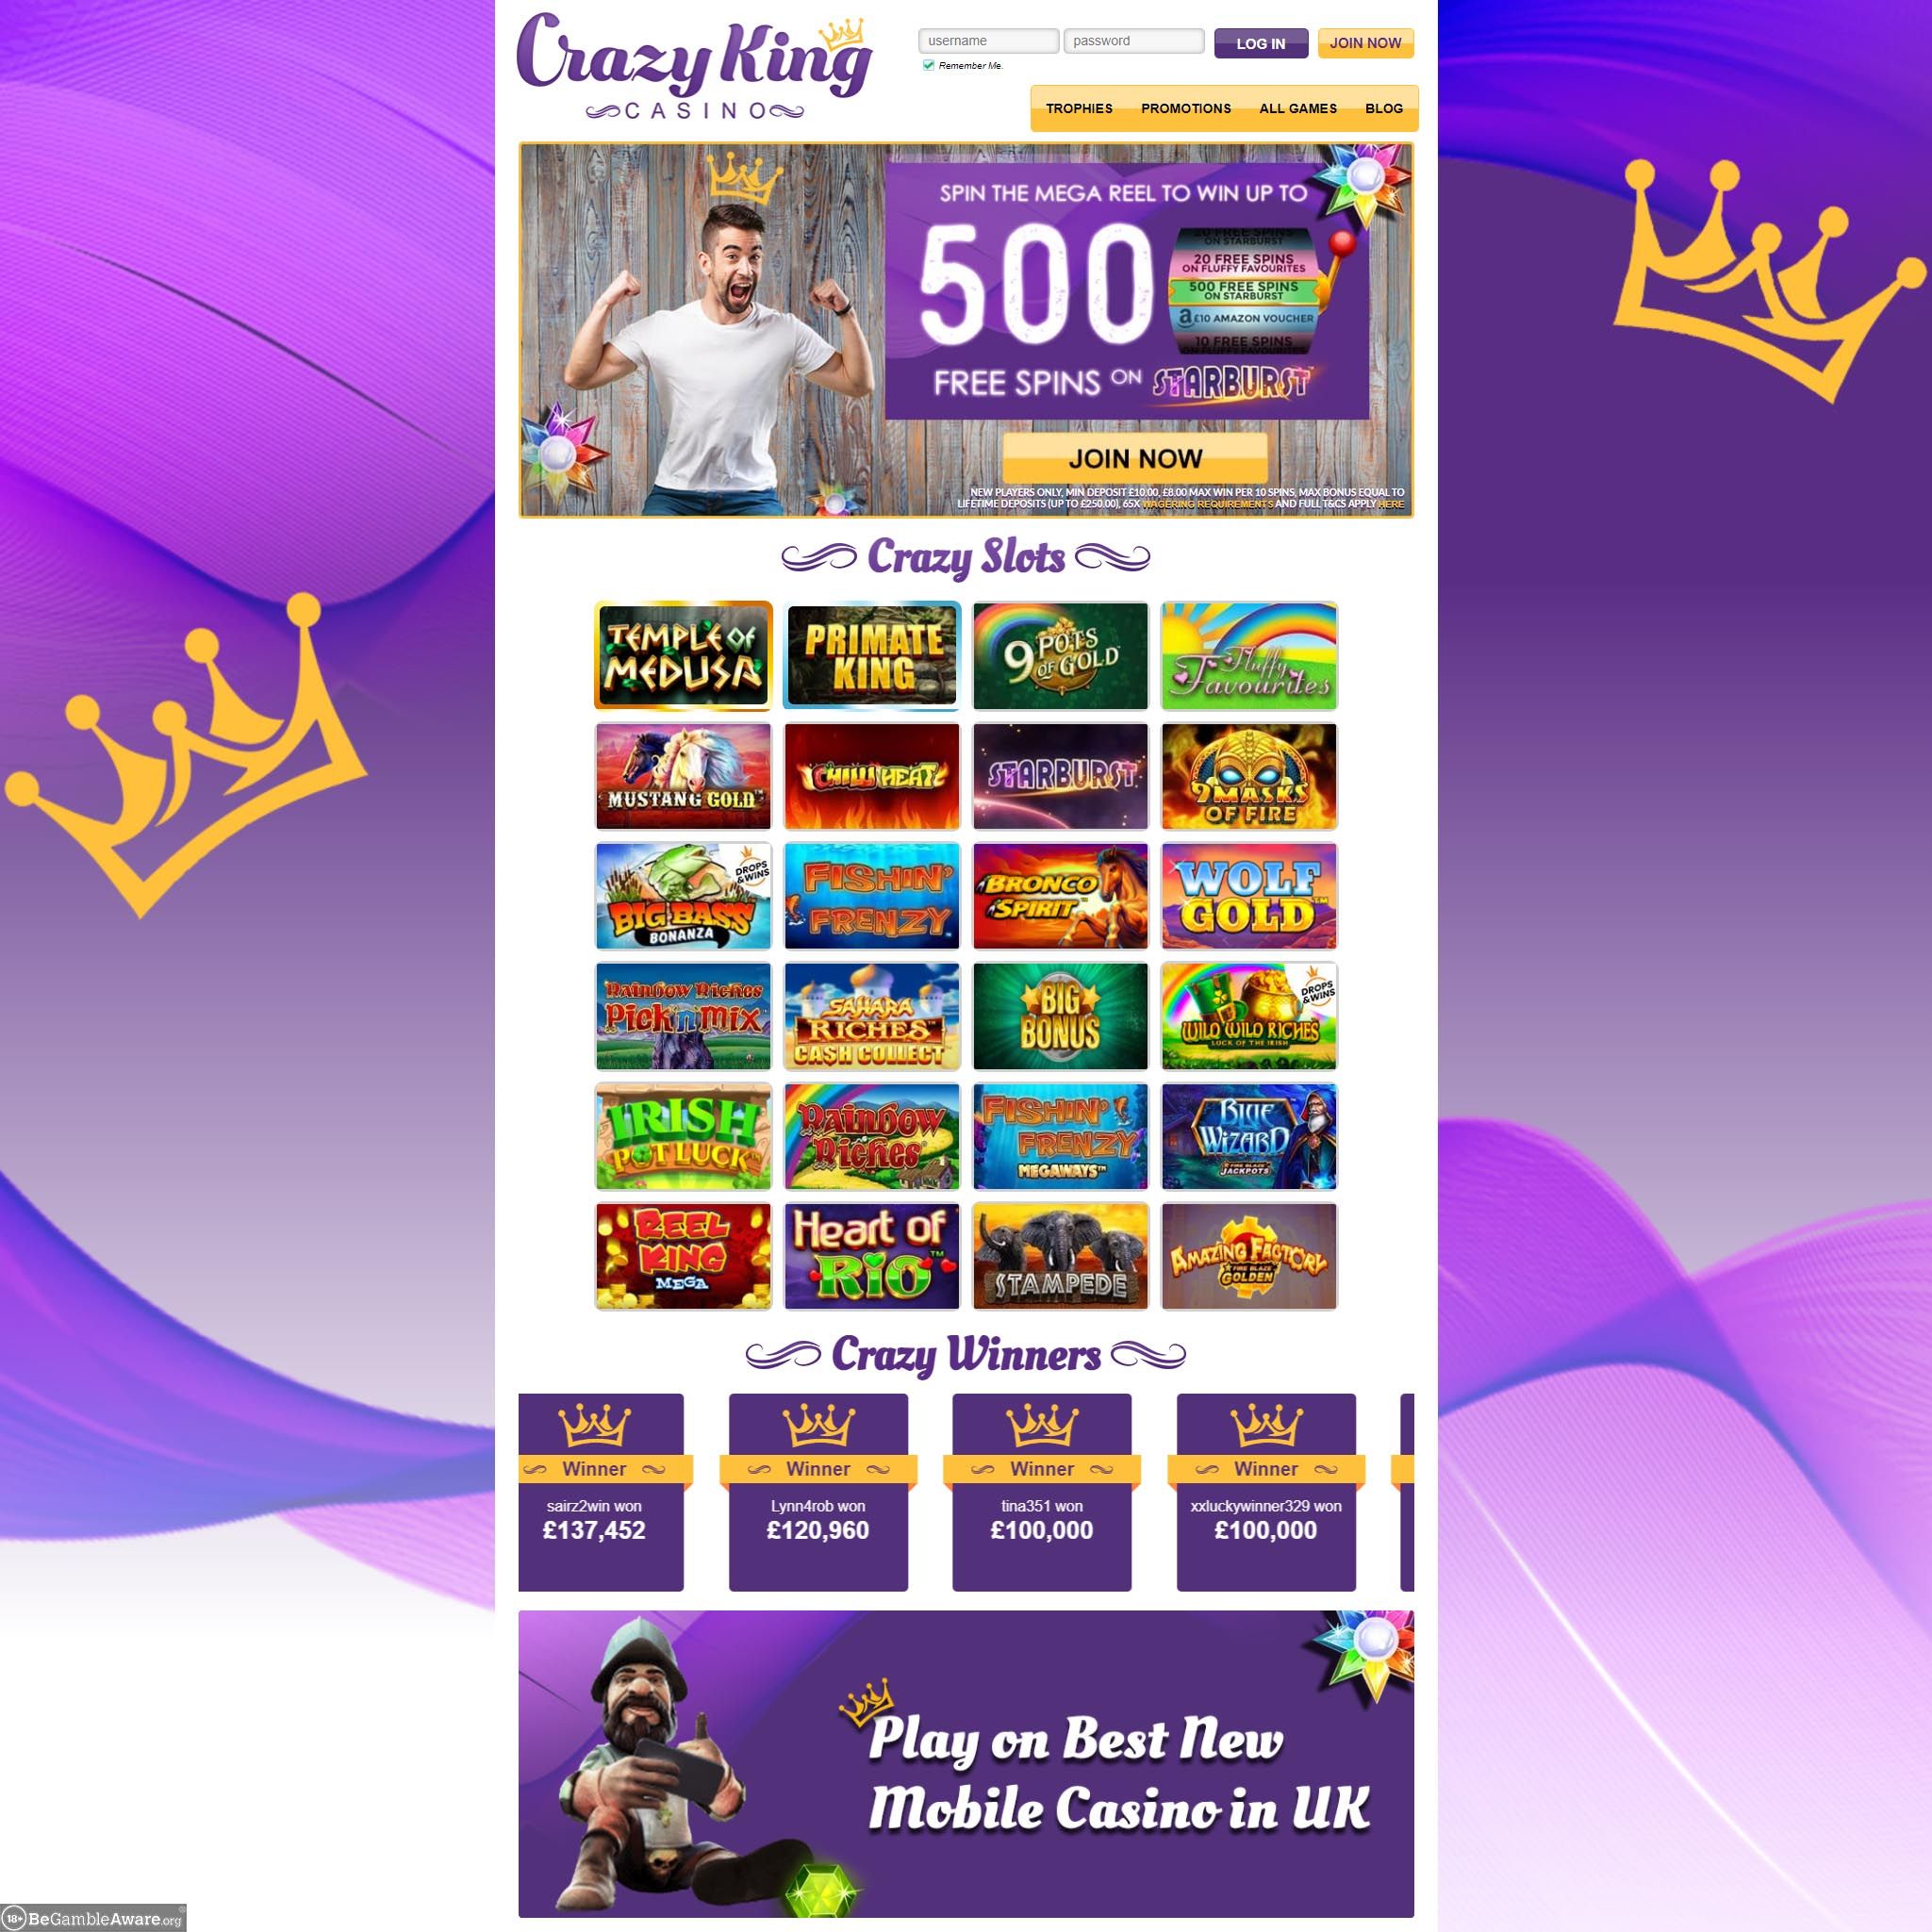 Crazy King Casino UK review by Mr. Gamble